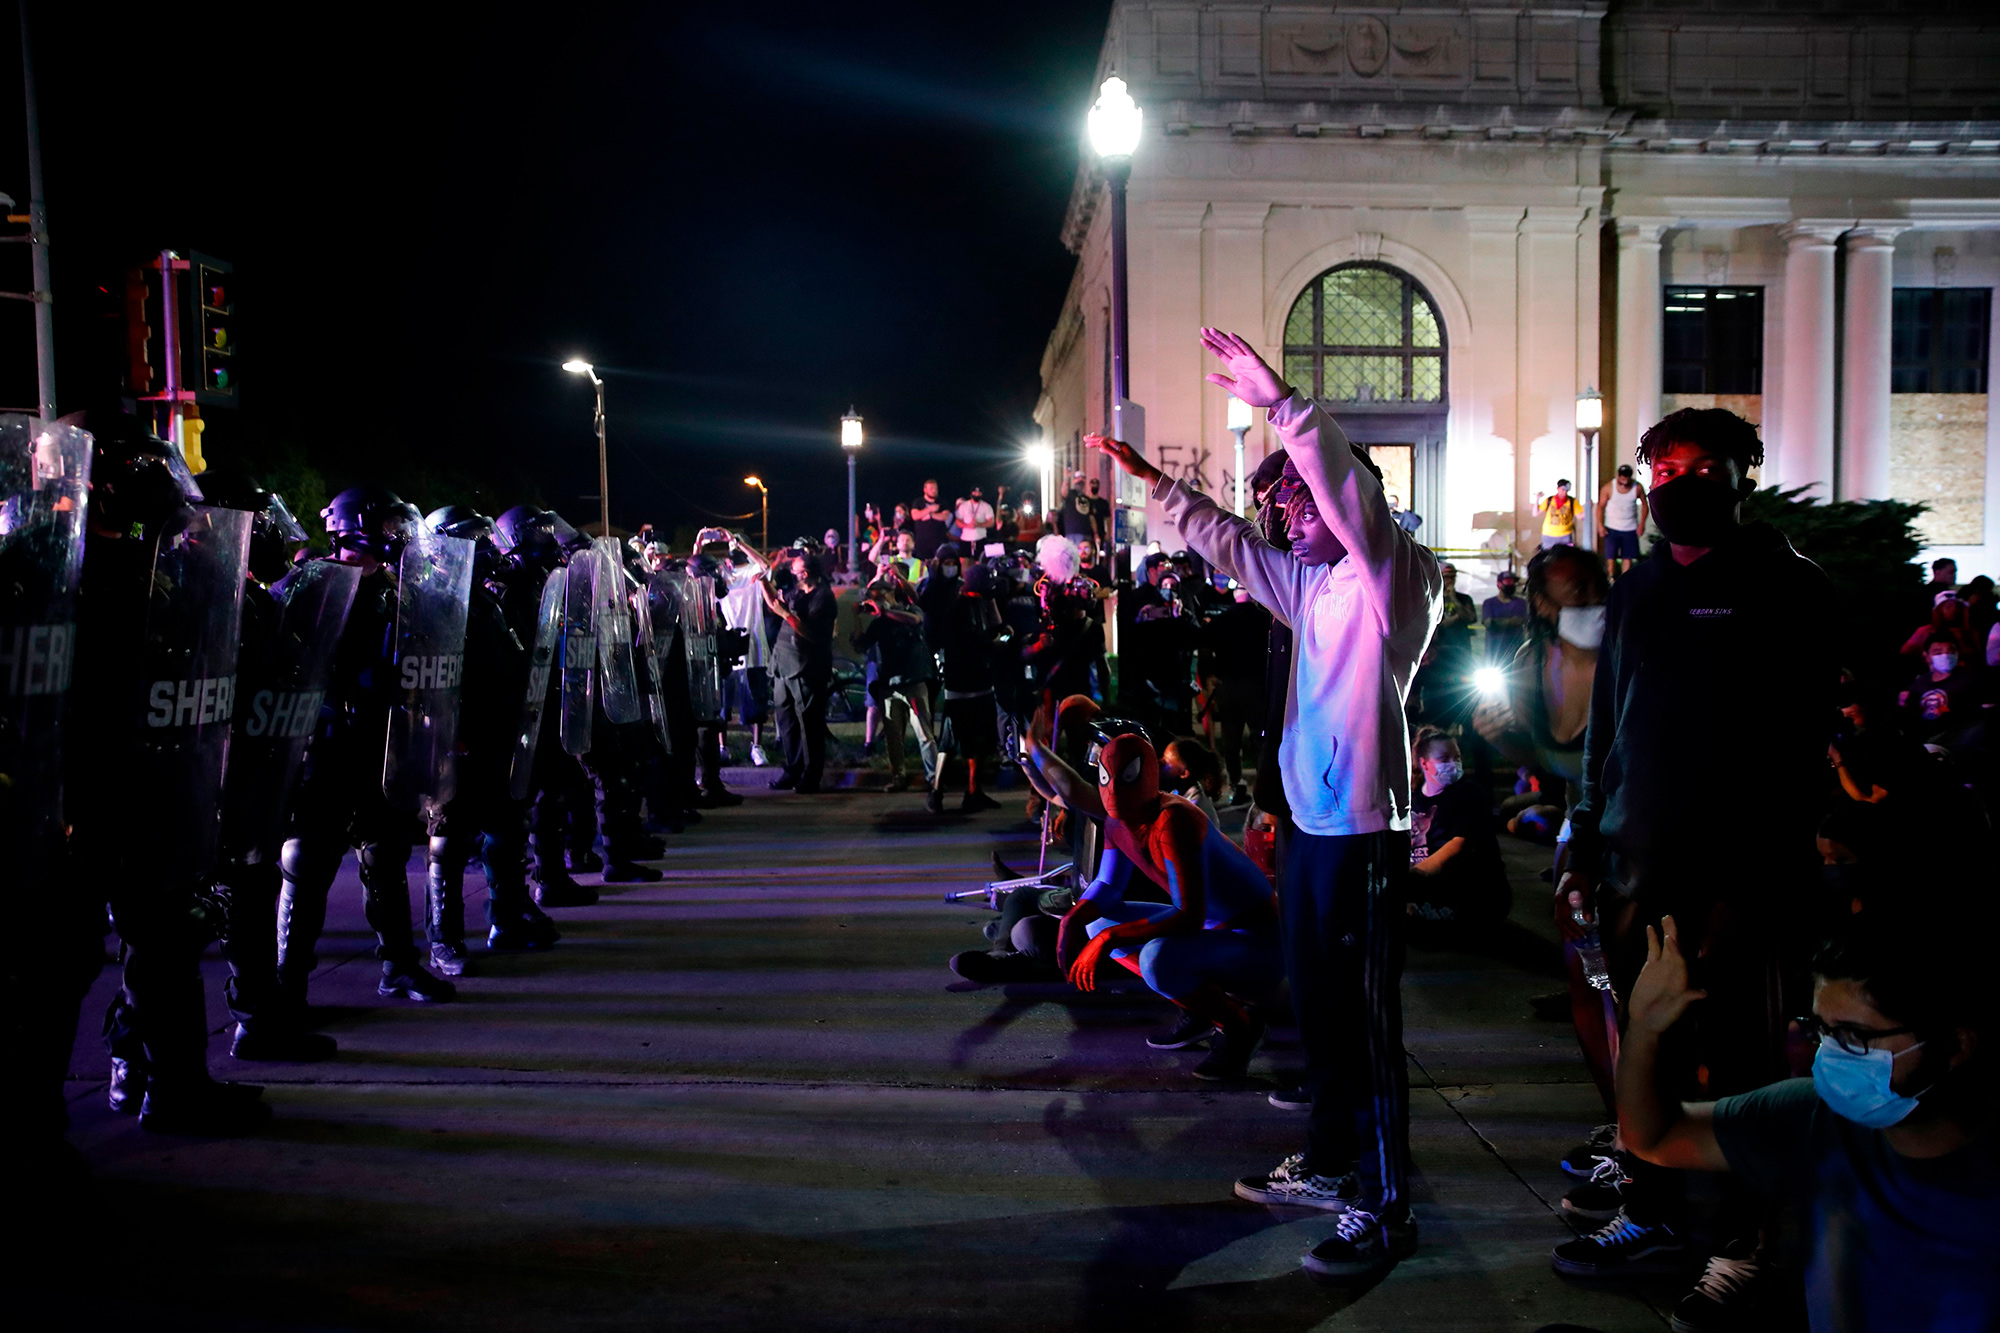 Protestors face police outside the County Courthouse during demonstrations in Kenosha, Wisconsin on Aug. 25.